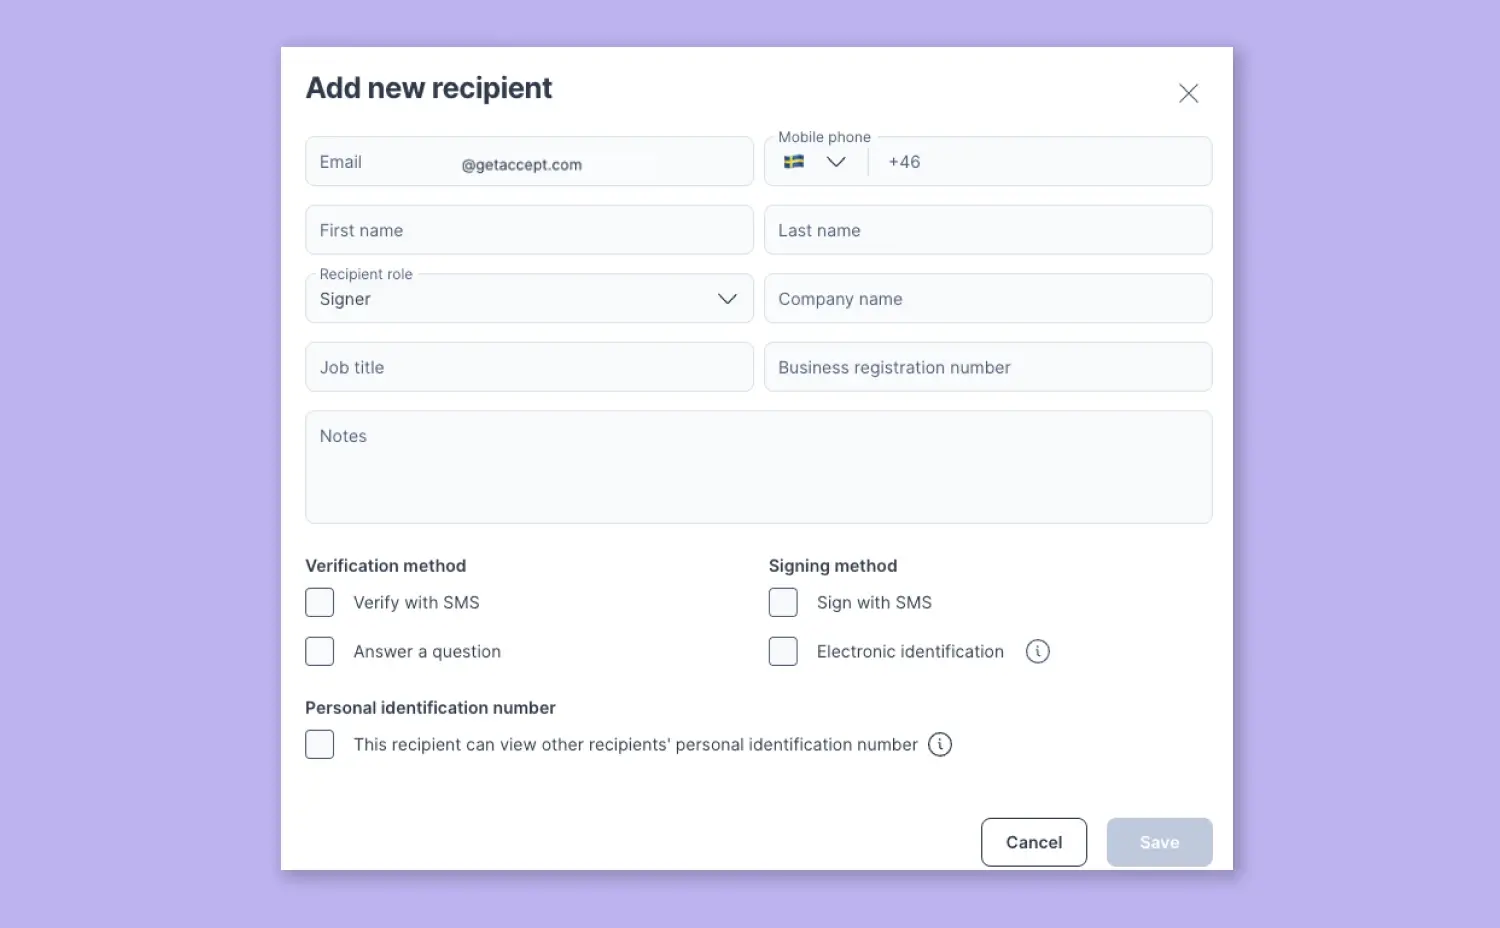 Adding and updating recipient details after send-out just got more flexible